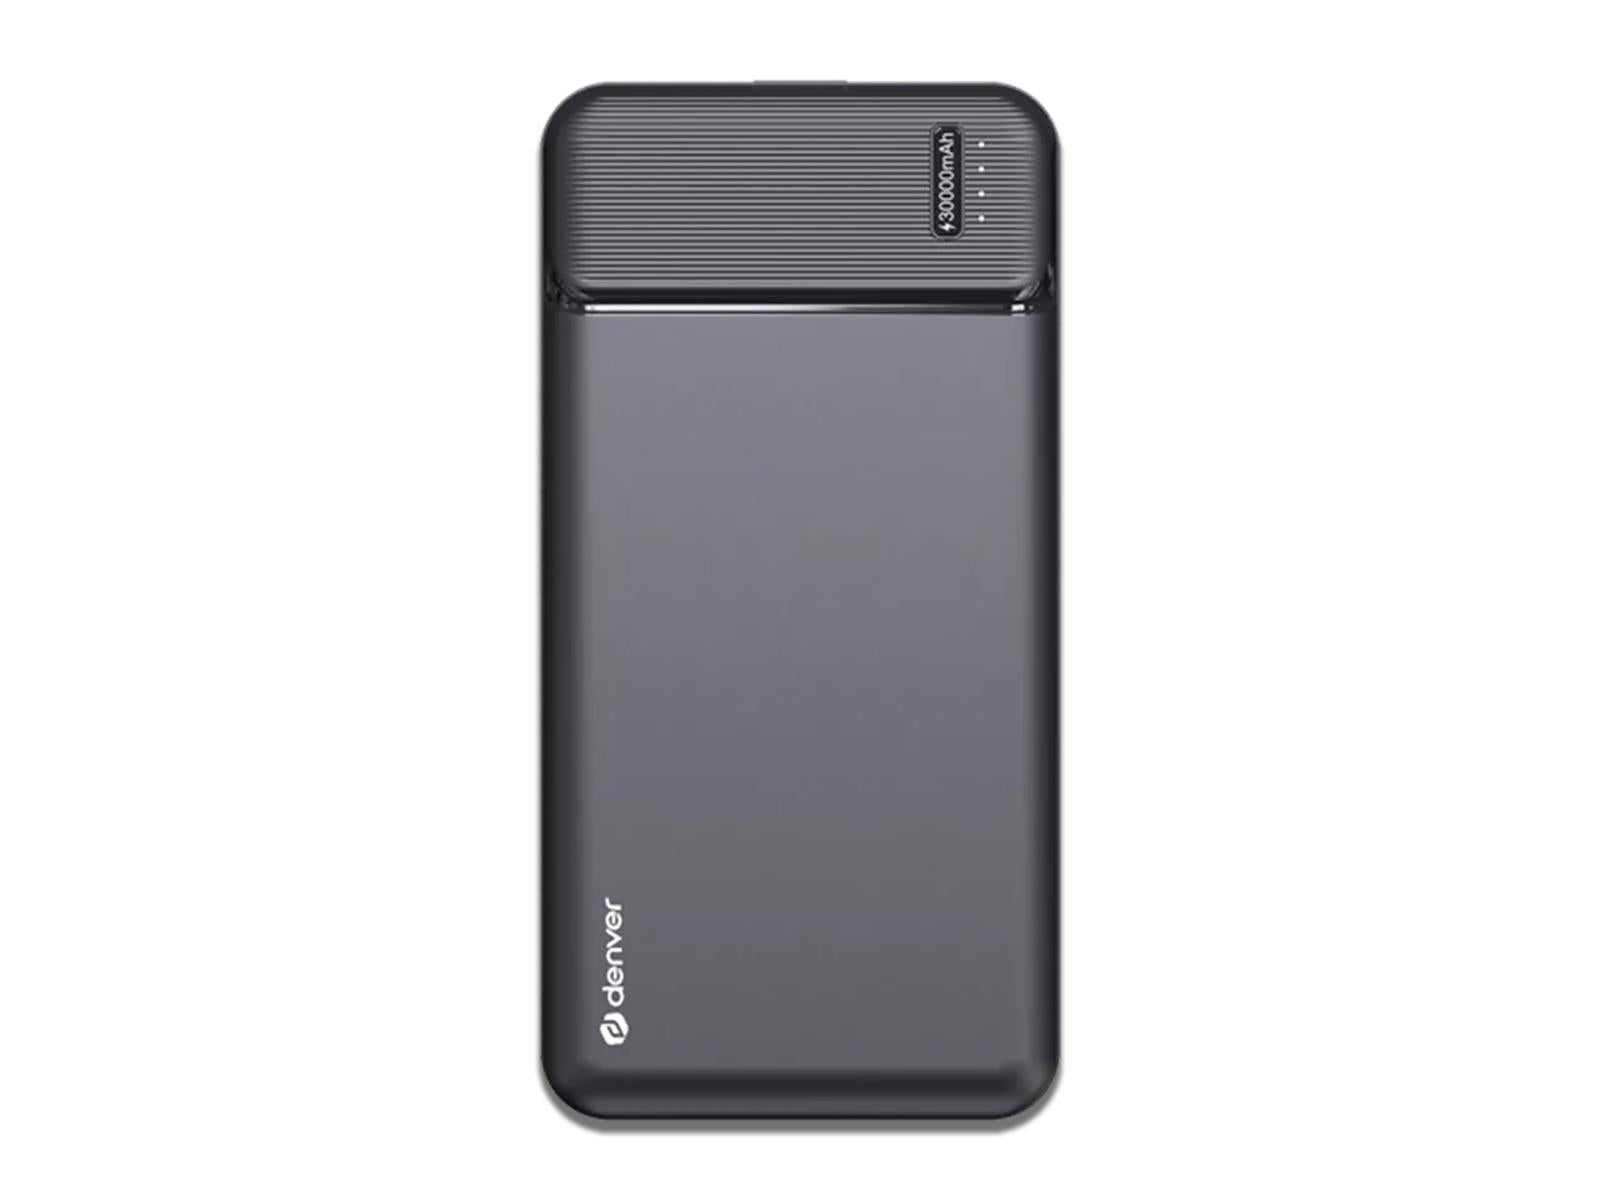 Denver High Capacity Portable Charger 30,000mAh Front View